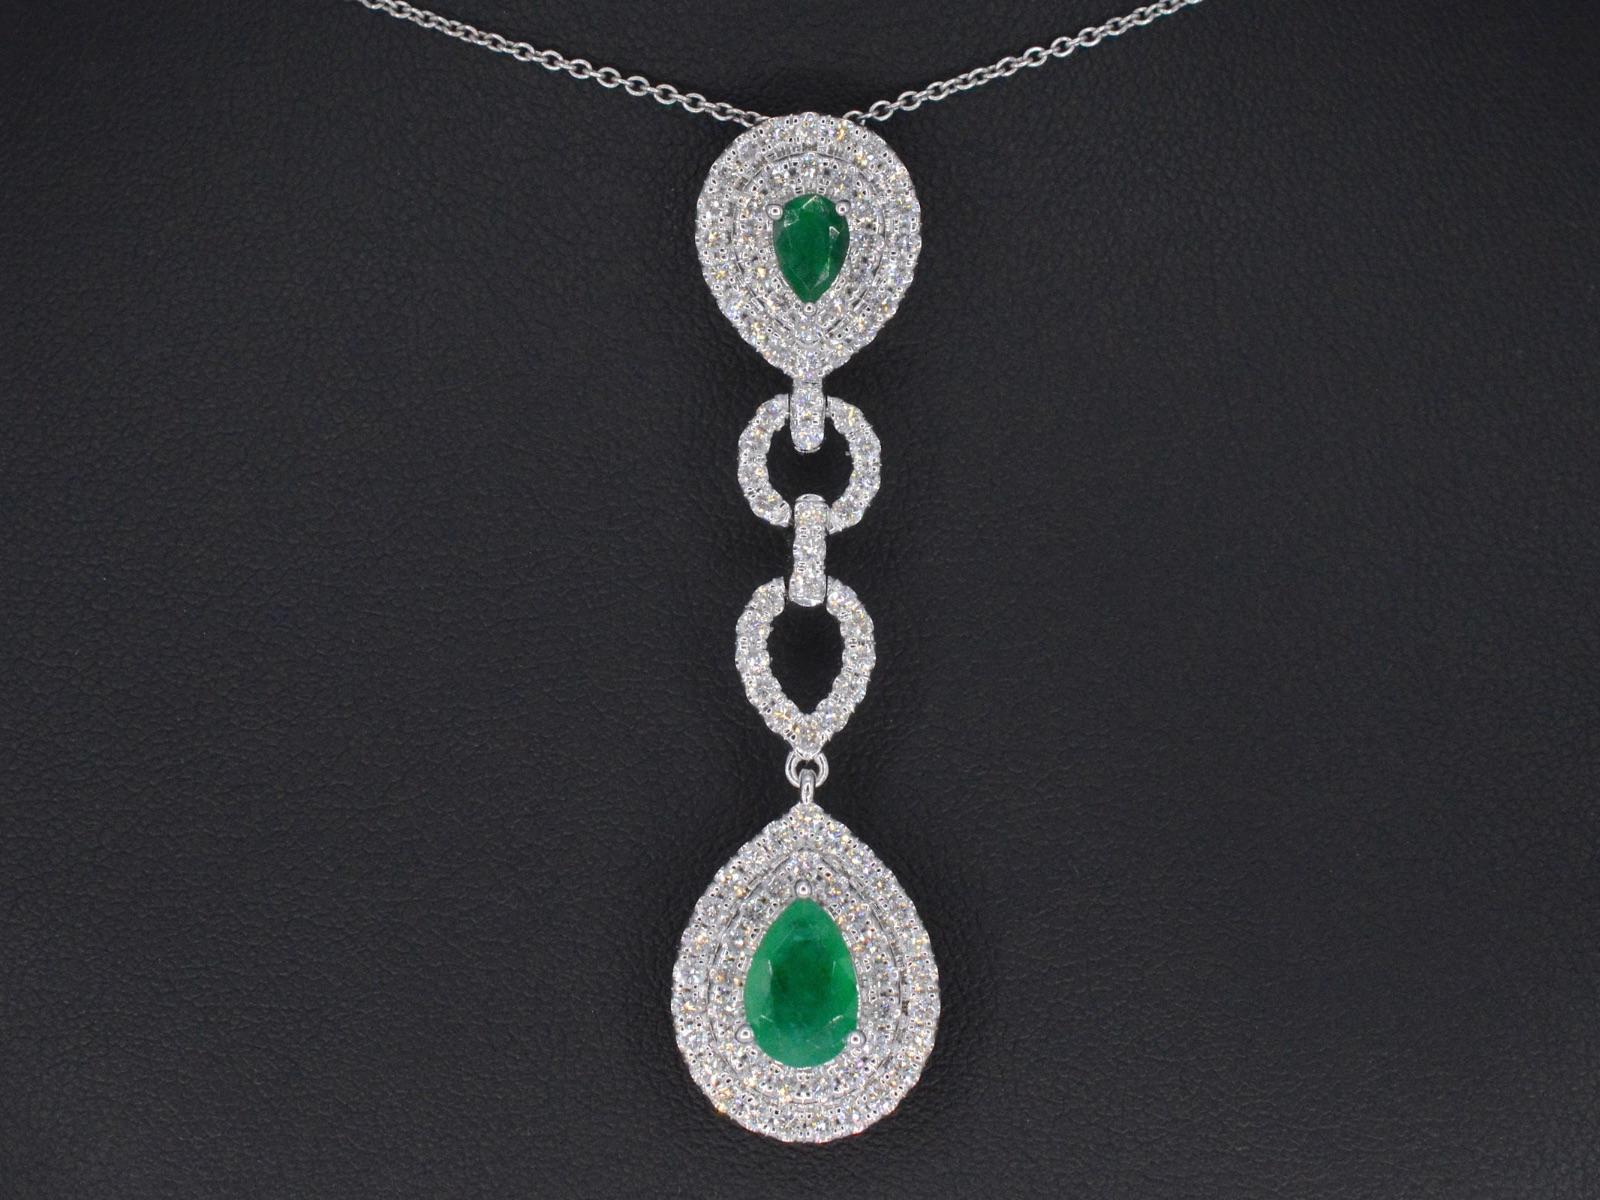 This gold pendant is a true statement piece that exudes luxury and sophistication. It features a stunning design that showcases brilliant-cut diamonds and two droplet-shaped emeralds, adding a pop of color to the piece. The diamonds and emeralds are